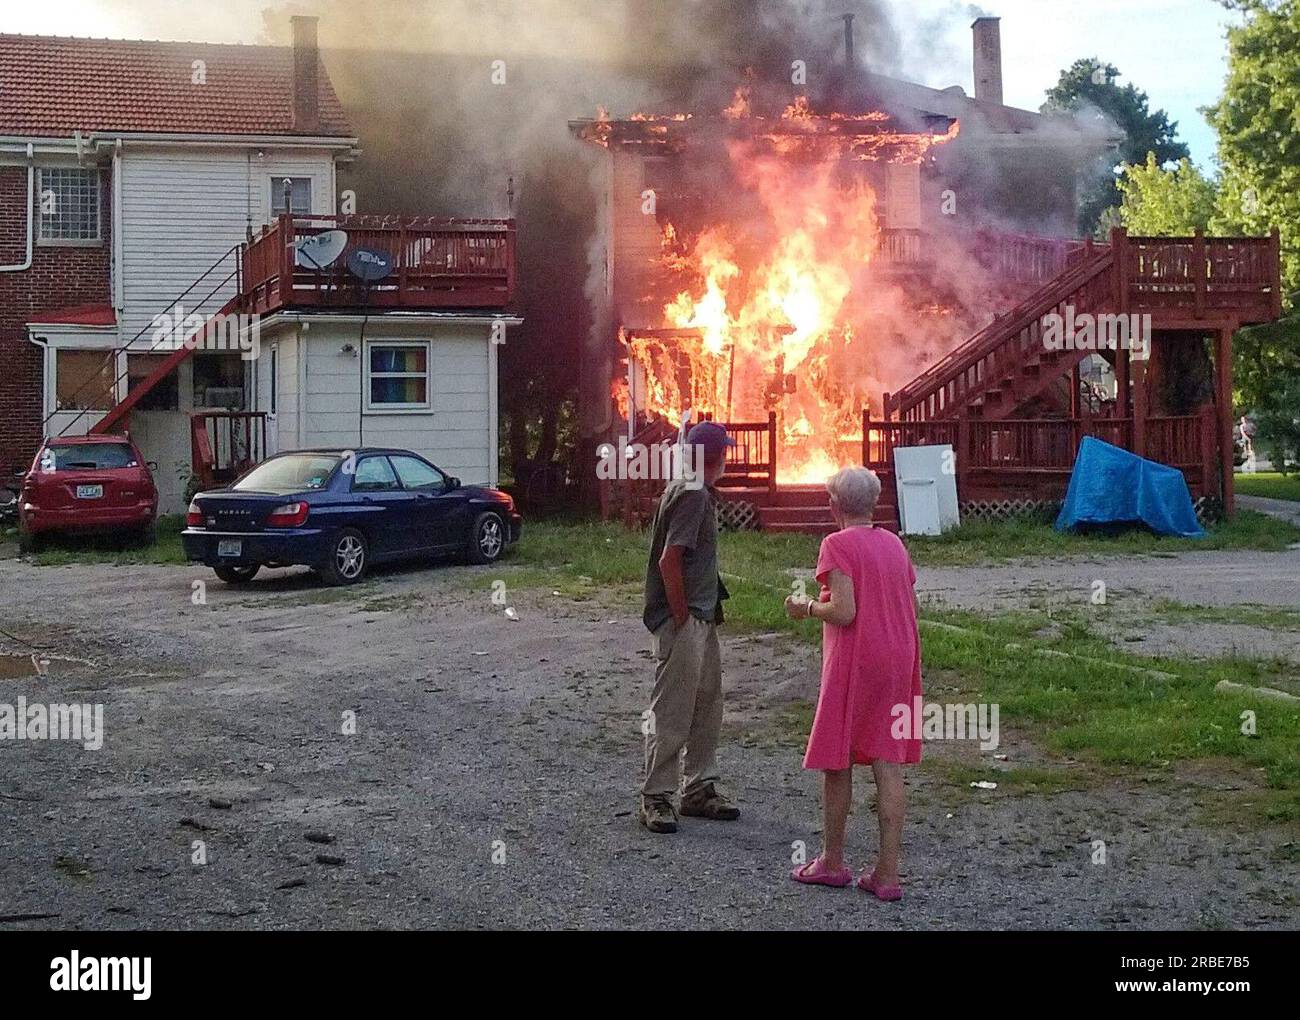 An unidentified man and woman watch as flames erupt from the back of a two-story house at 1006 Fontaine Rd. on the border between the Ashland Park and Chevy Chase neighborhoods on Sunday, July 10, 2016 in Lexington, Fayette County, KY, USA. No injuries were reported and the cause of the fire has not yet been determined. (Apex MediaWire Photo by Billy Suratt) Stock Photo